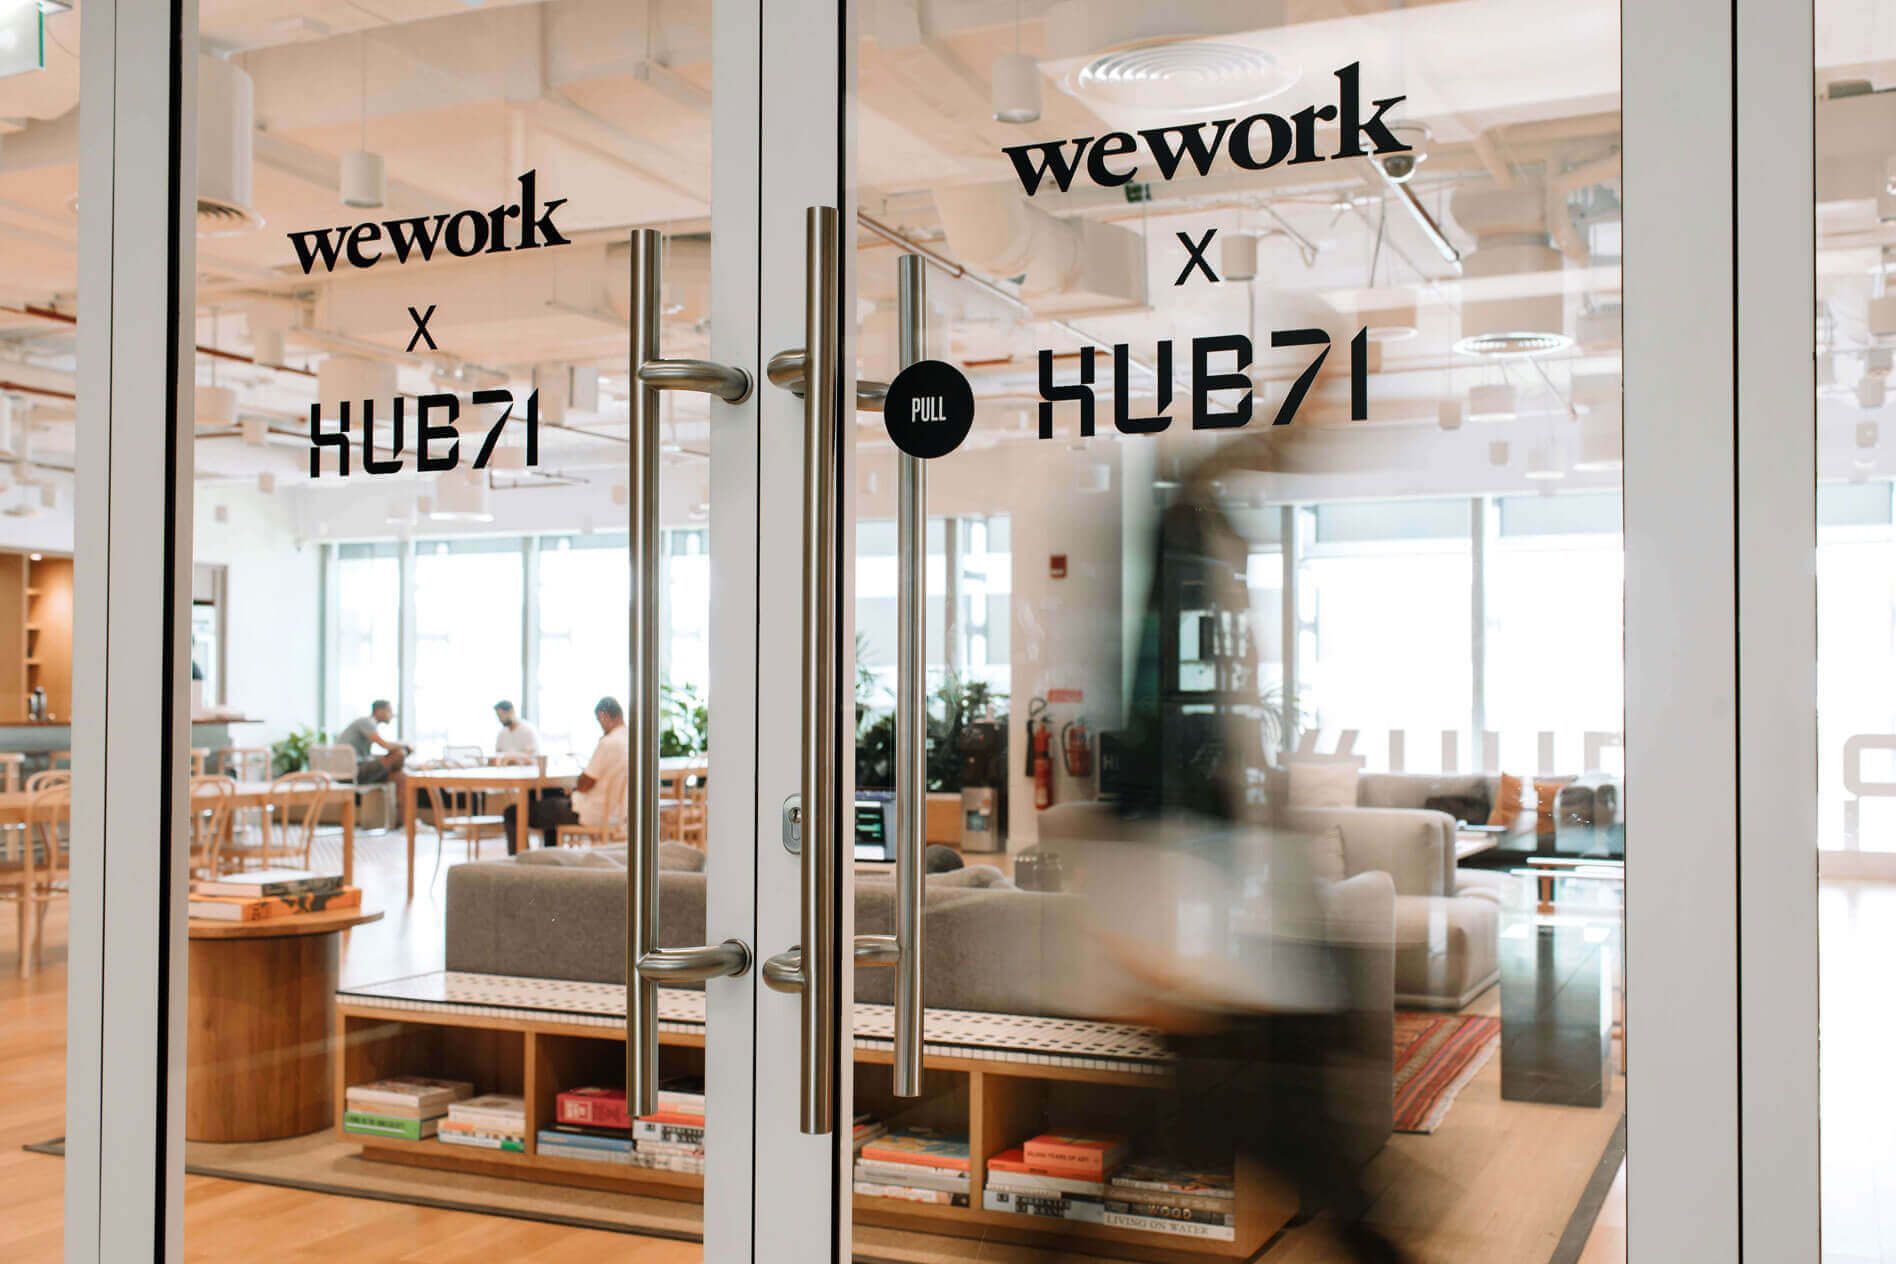 The WeWork offices at Abu Dhabi's Hub71 startup accelerator. (Photo: Hub71)